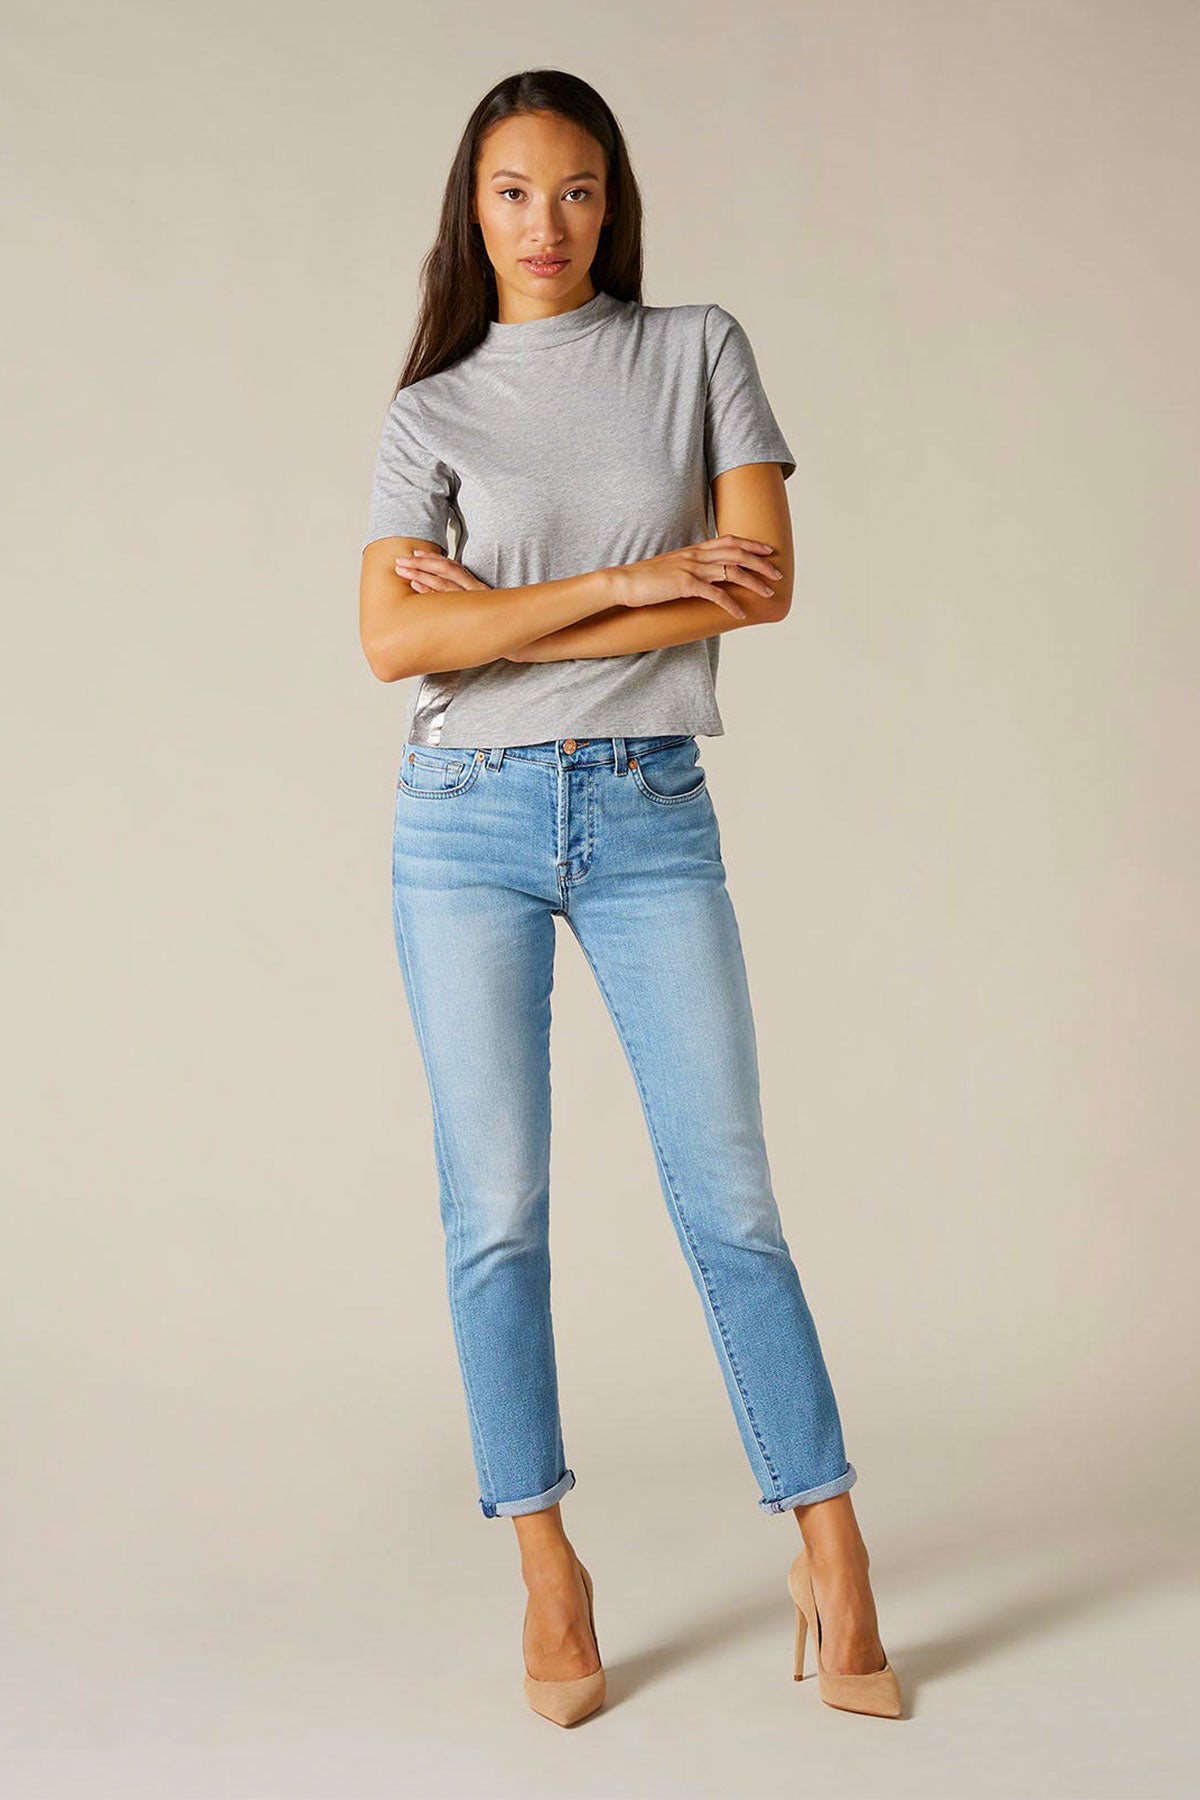 7 For All Mankind Asher Boyfriend Jeans-Libas Trendy Fashion Store